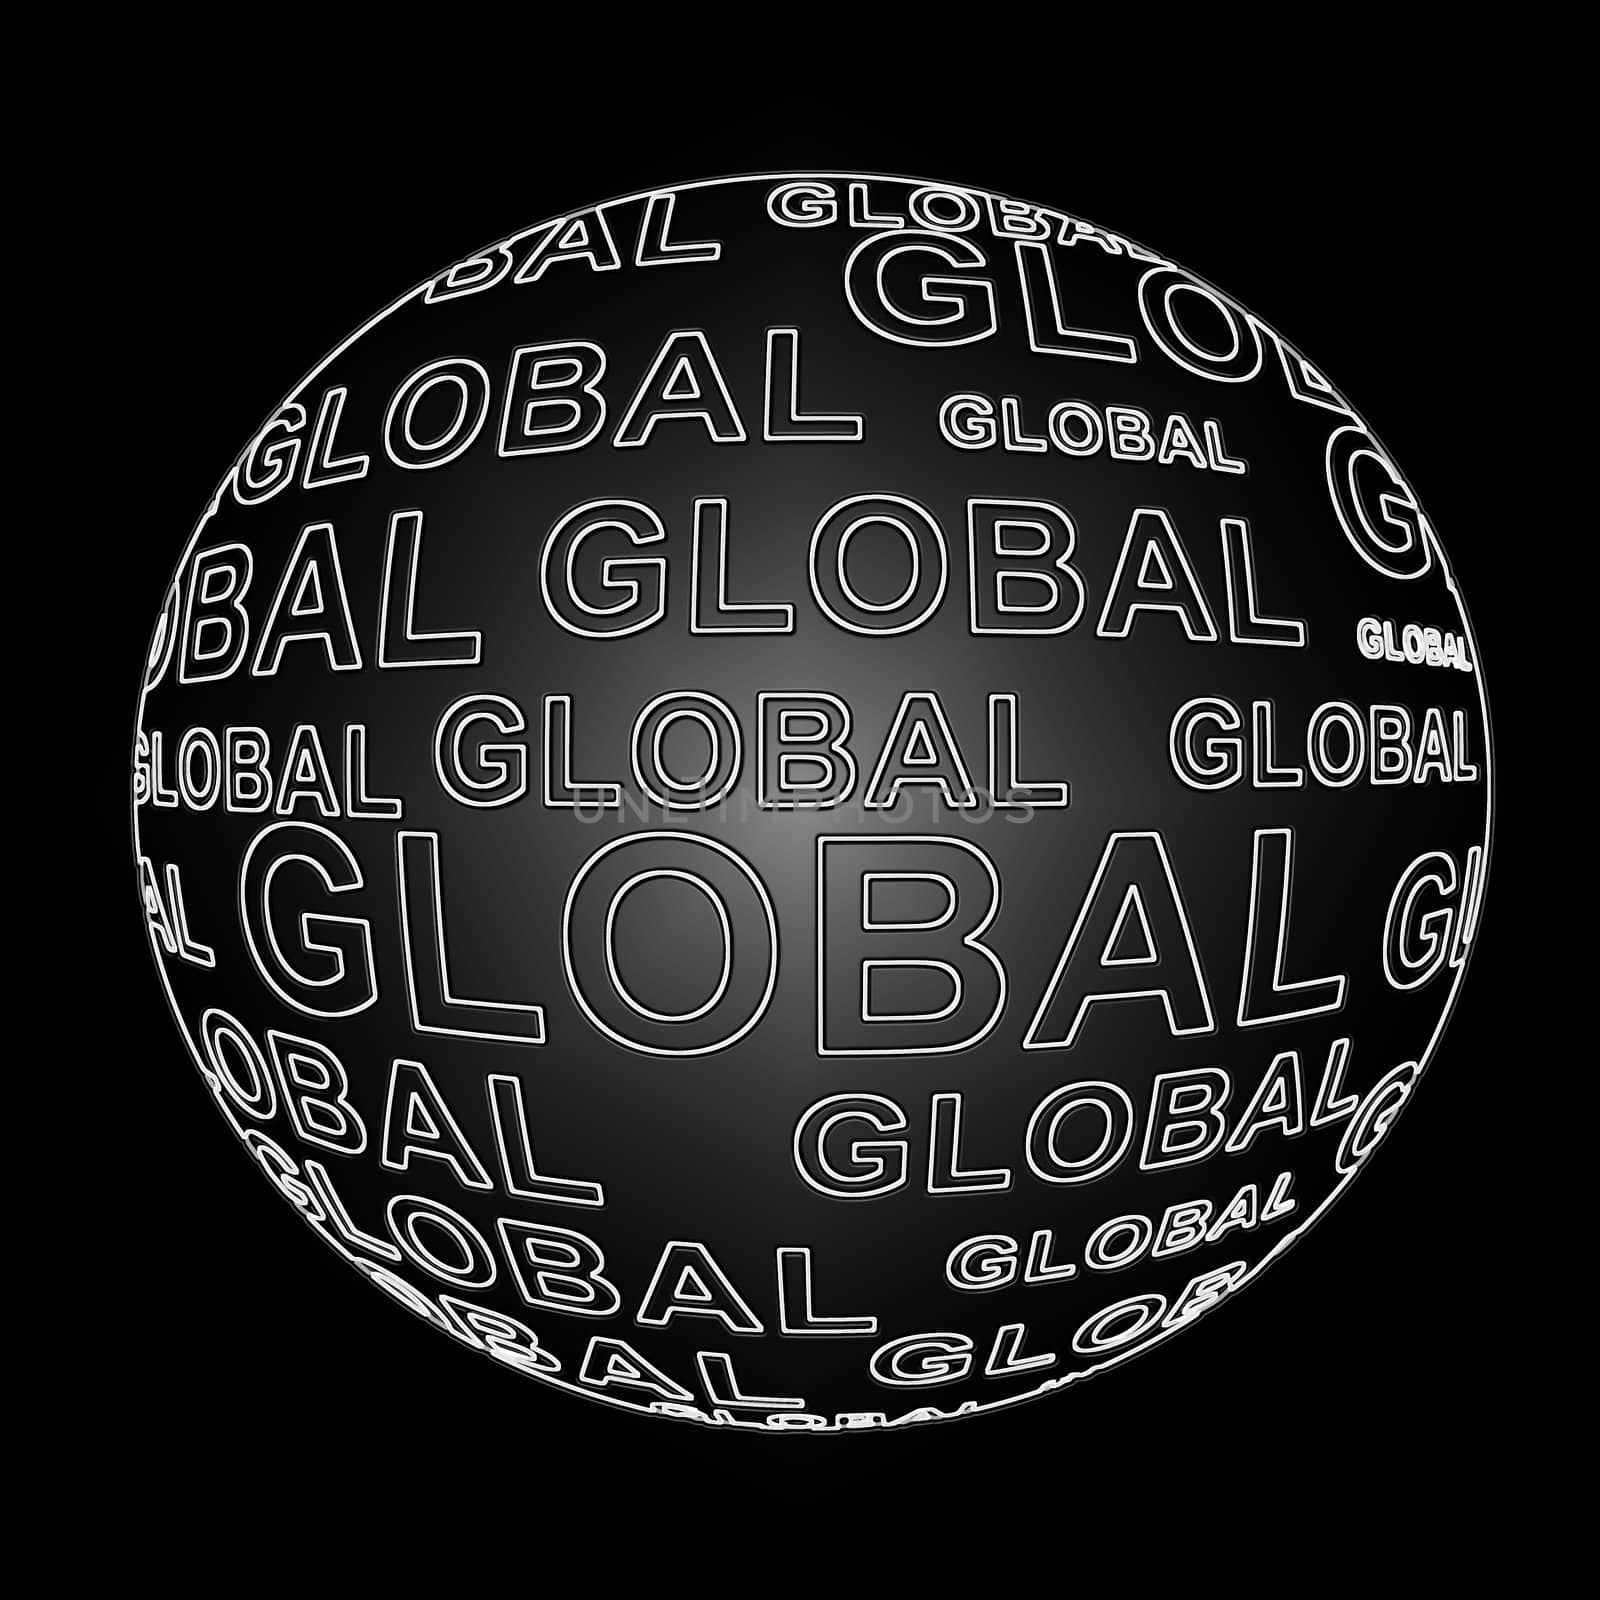 Illustration depicting a black sphere with the words 'global' arranged over the entire shape. Black background.